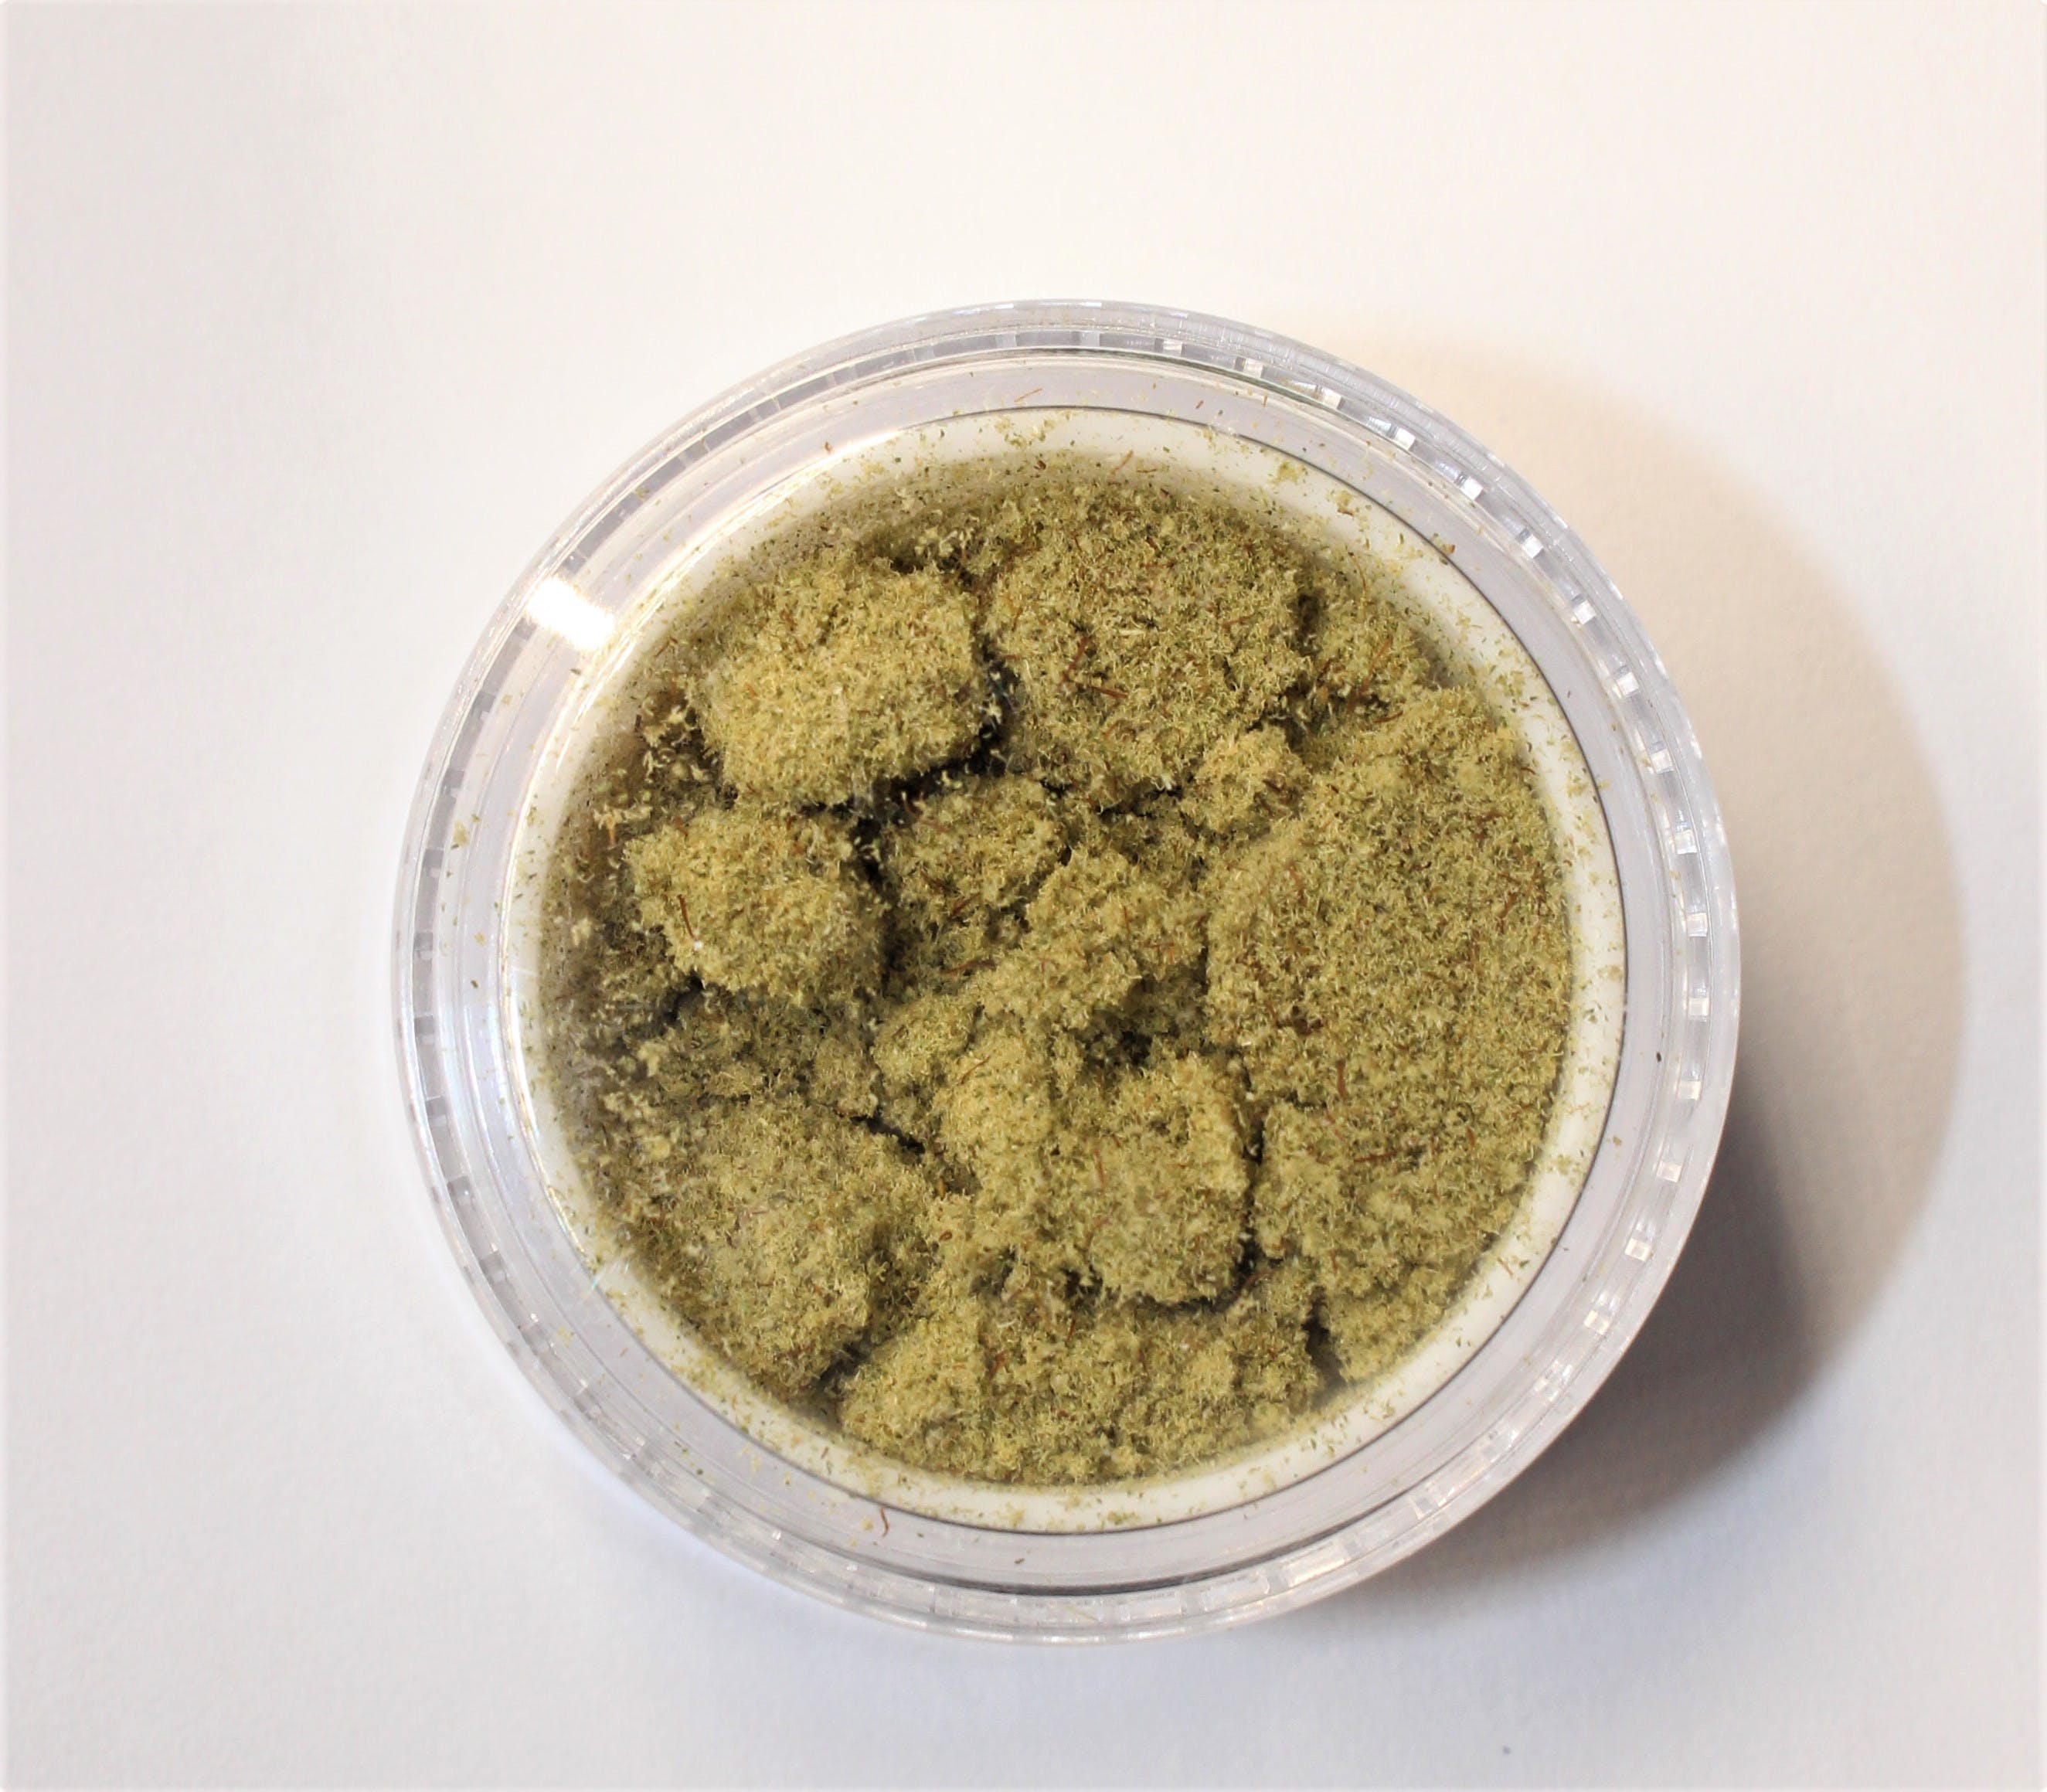 concentrate-silver-daddy-1g-kief